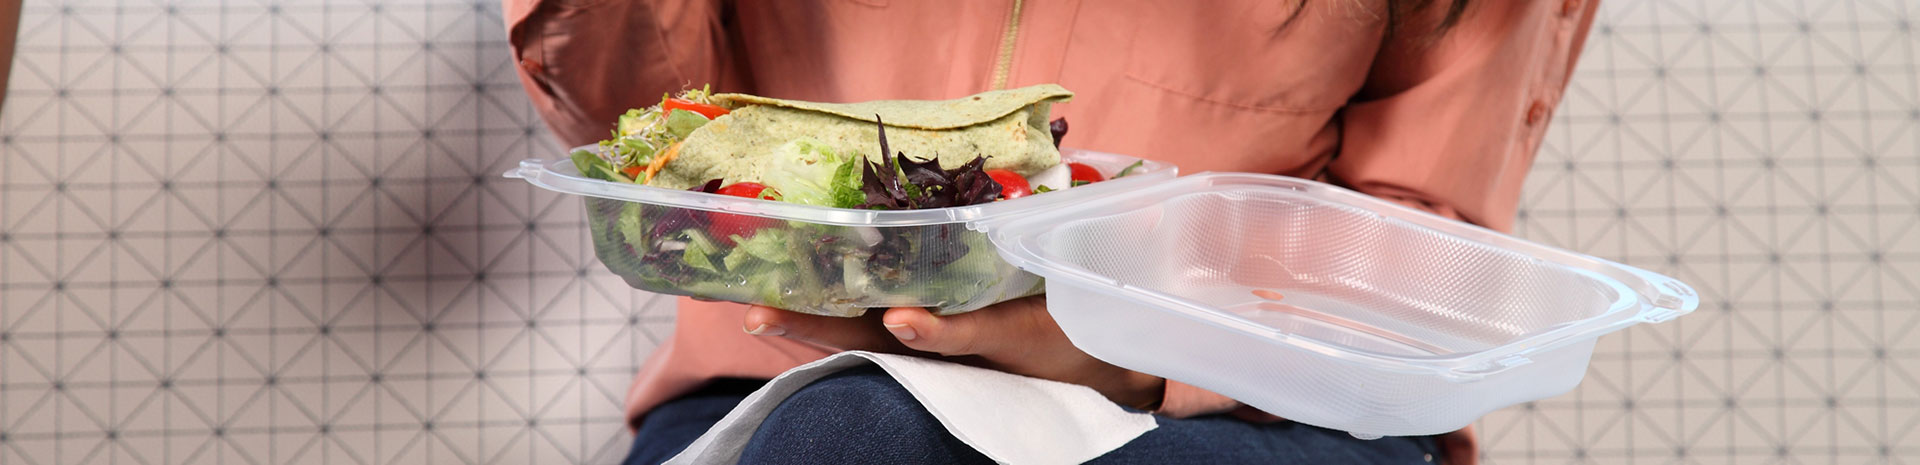 lap of person eating salad from clear hinged food container